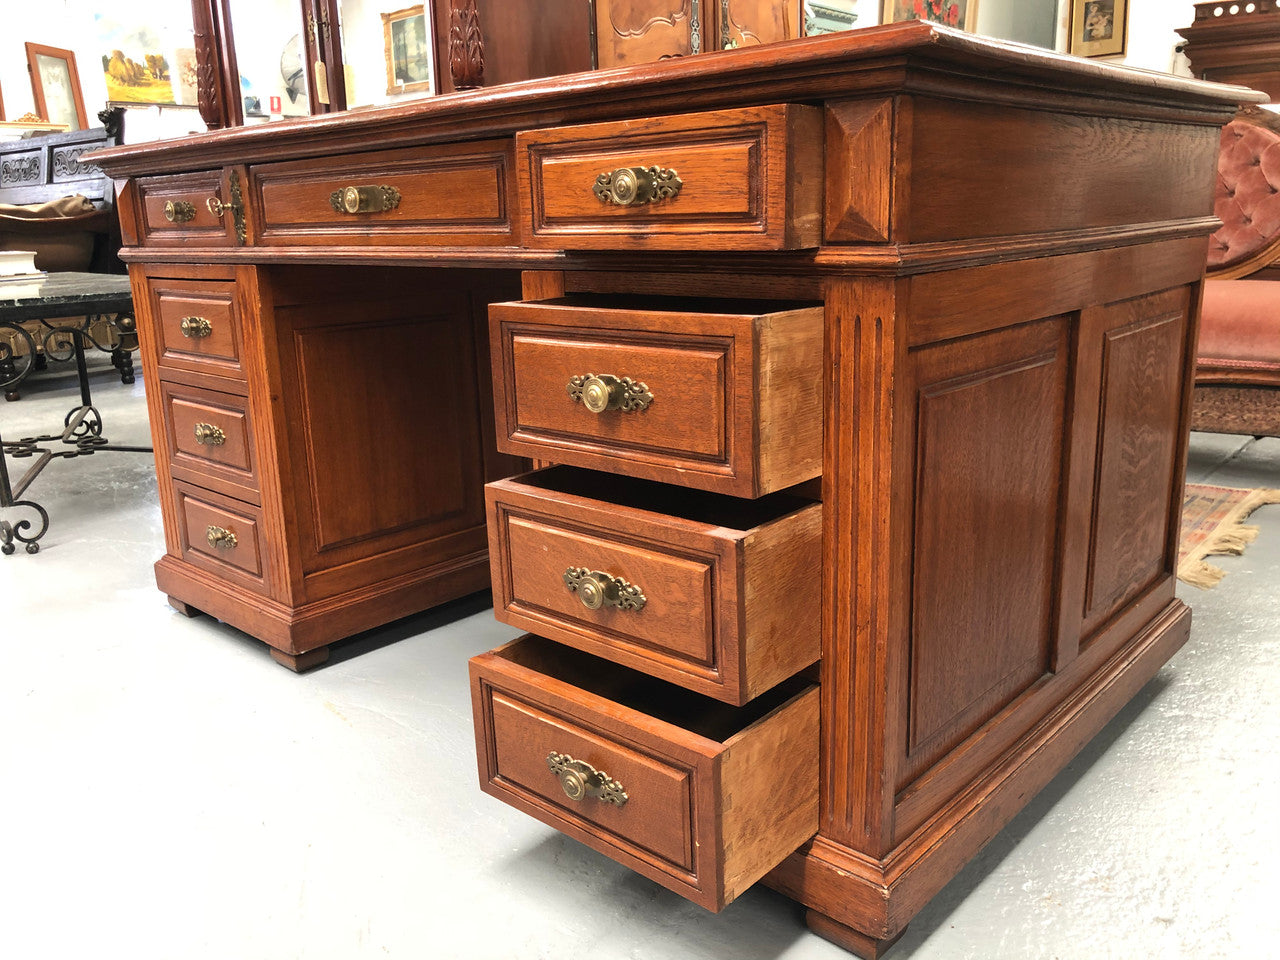 Antique french oak partners desk with plenty of drawers and cupboards and has an inbuilt Chubb Safe with keys. In very good condition.